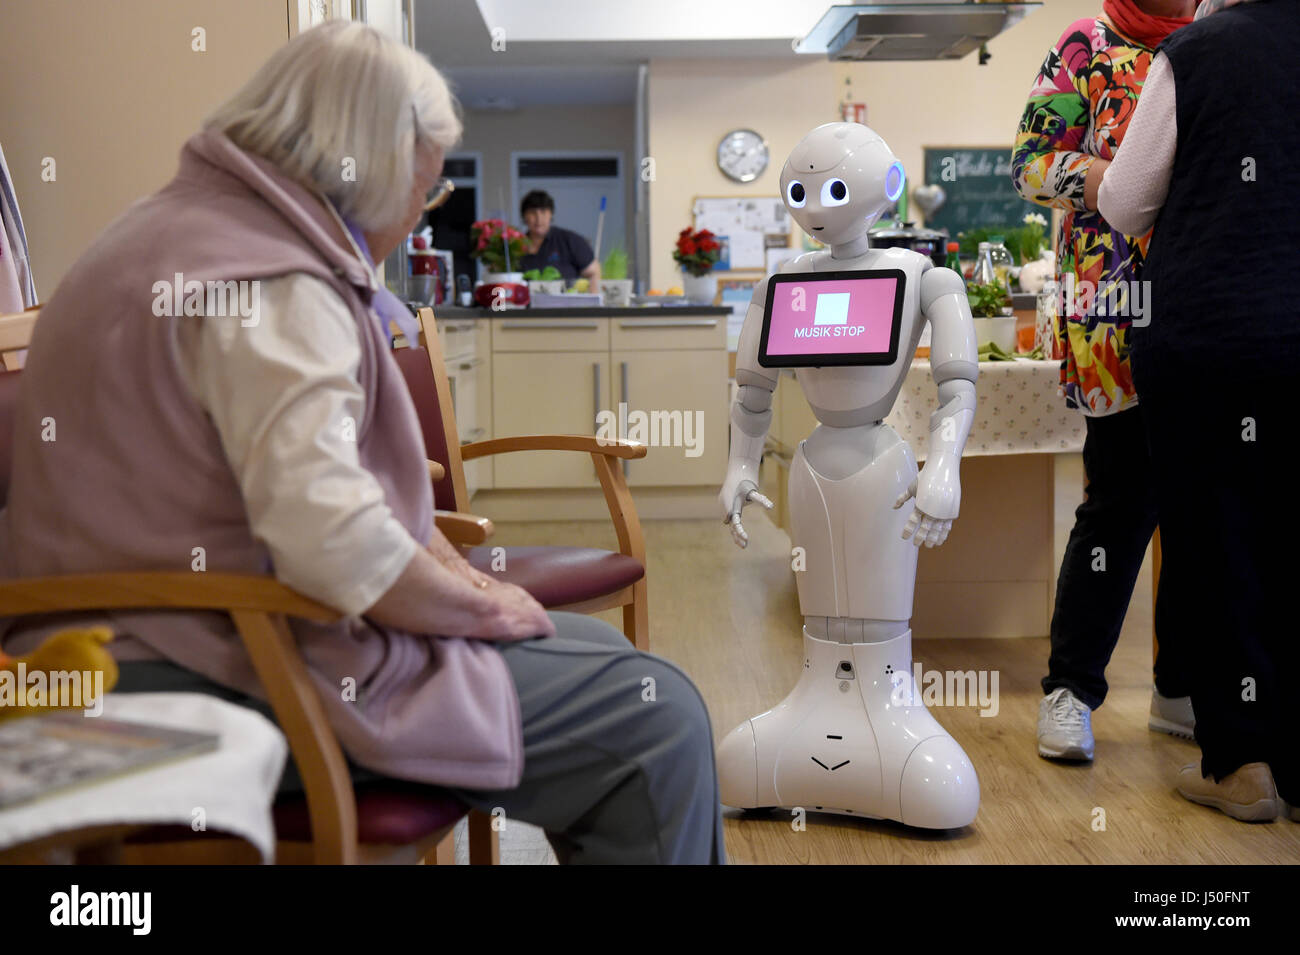 Germany. 11th May, 2017. "Emma" the pictured in a Diakonie Altholstein dementia residential group in Kiel, Germany, 11 May 2017. The robot can speak, play music and take of